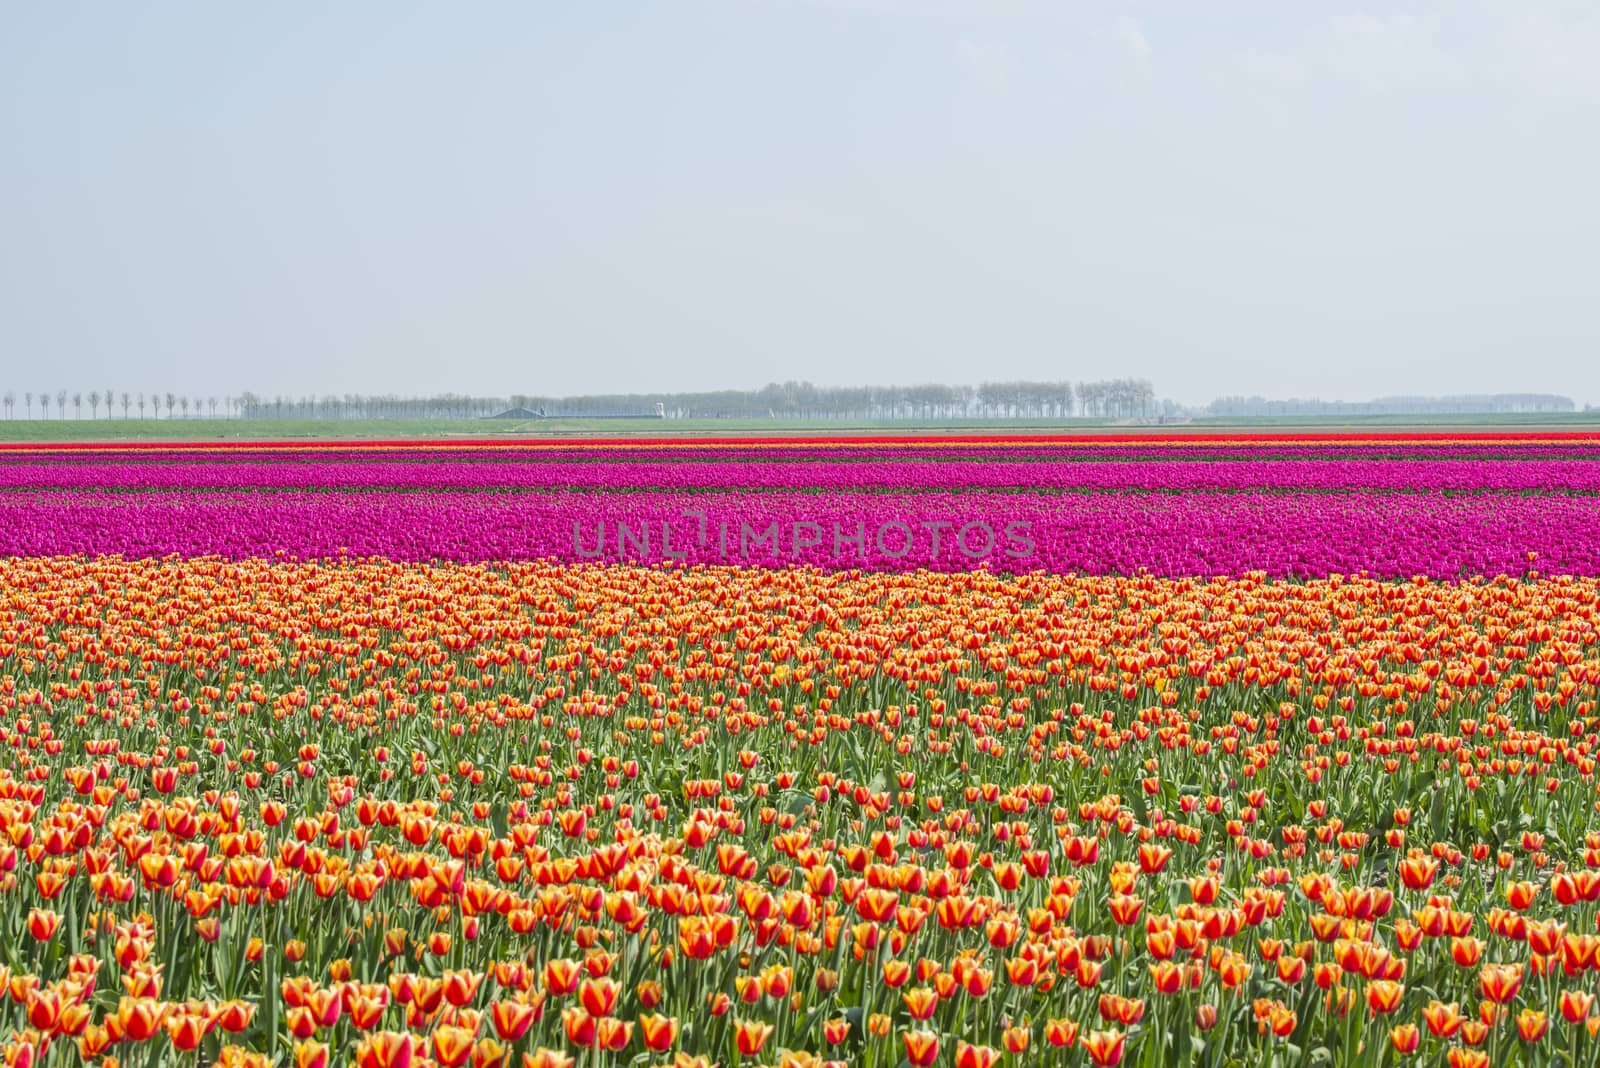 filed of red yellow purple and pink tulips in holland on goeree with single tree at the background in holland